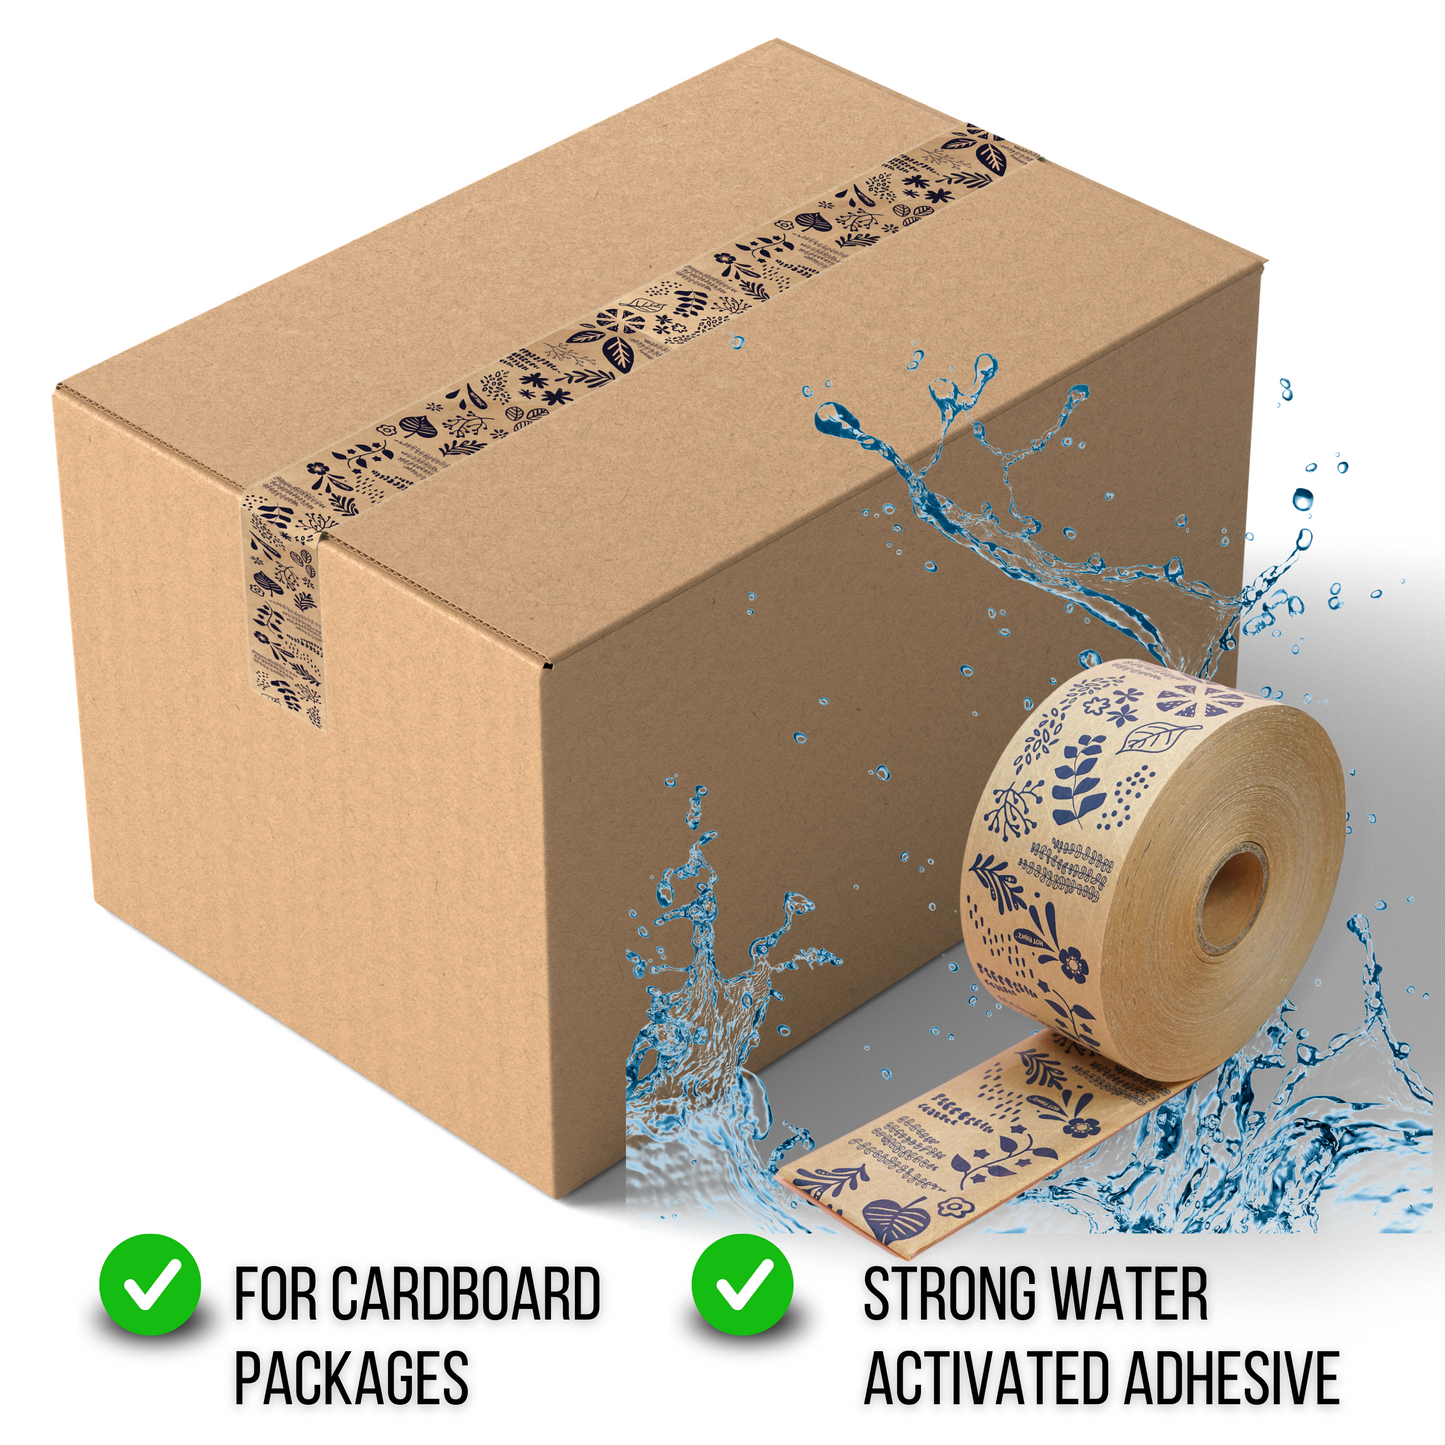 Reinforced Water Activated Kraft Paper Tape, Heavy Duty Gummed Seal, Nature, 2.75 in x 450 ft, 1 Roll